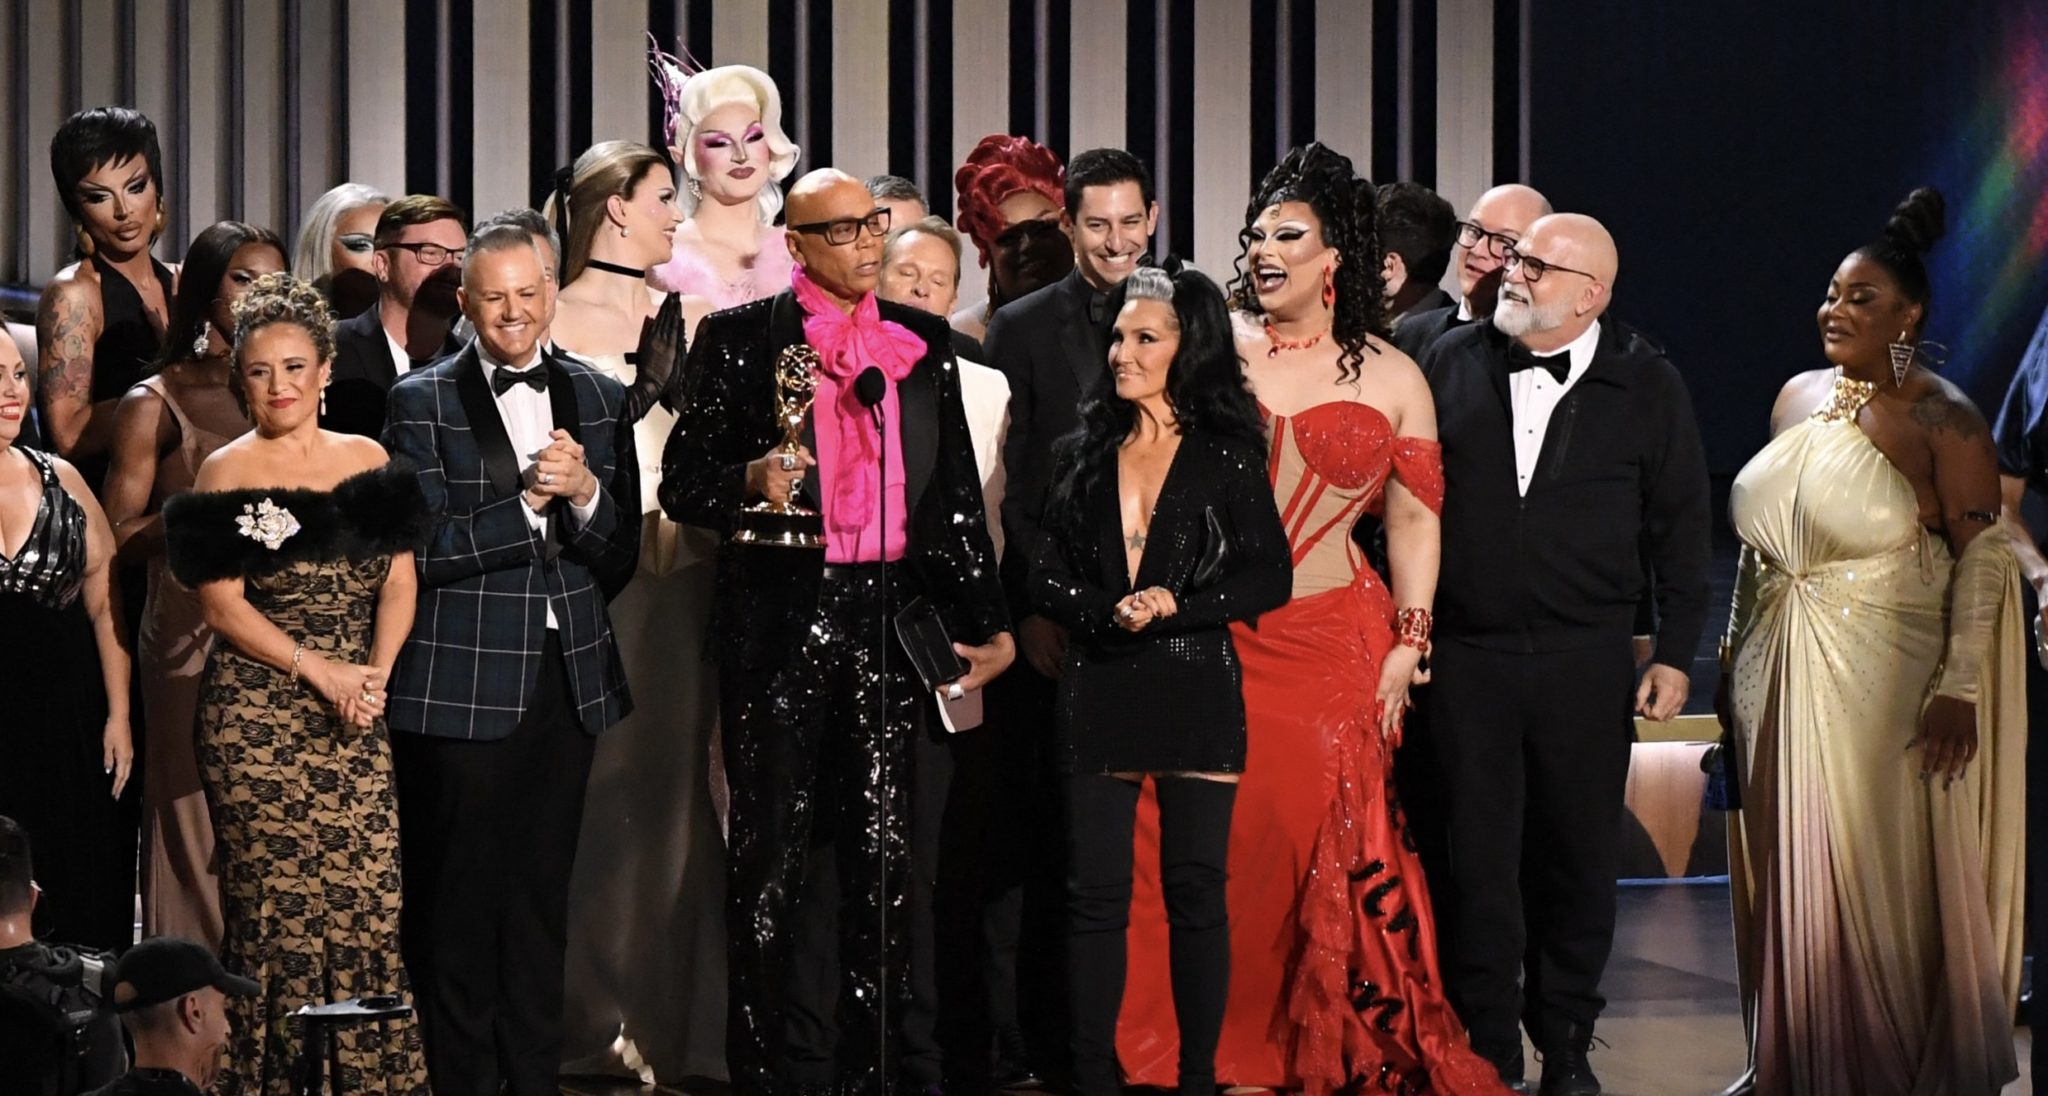 ‘RuPaul’s Drag Race’ Takes The Emmy Again For Outstanding Reality TV ...